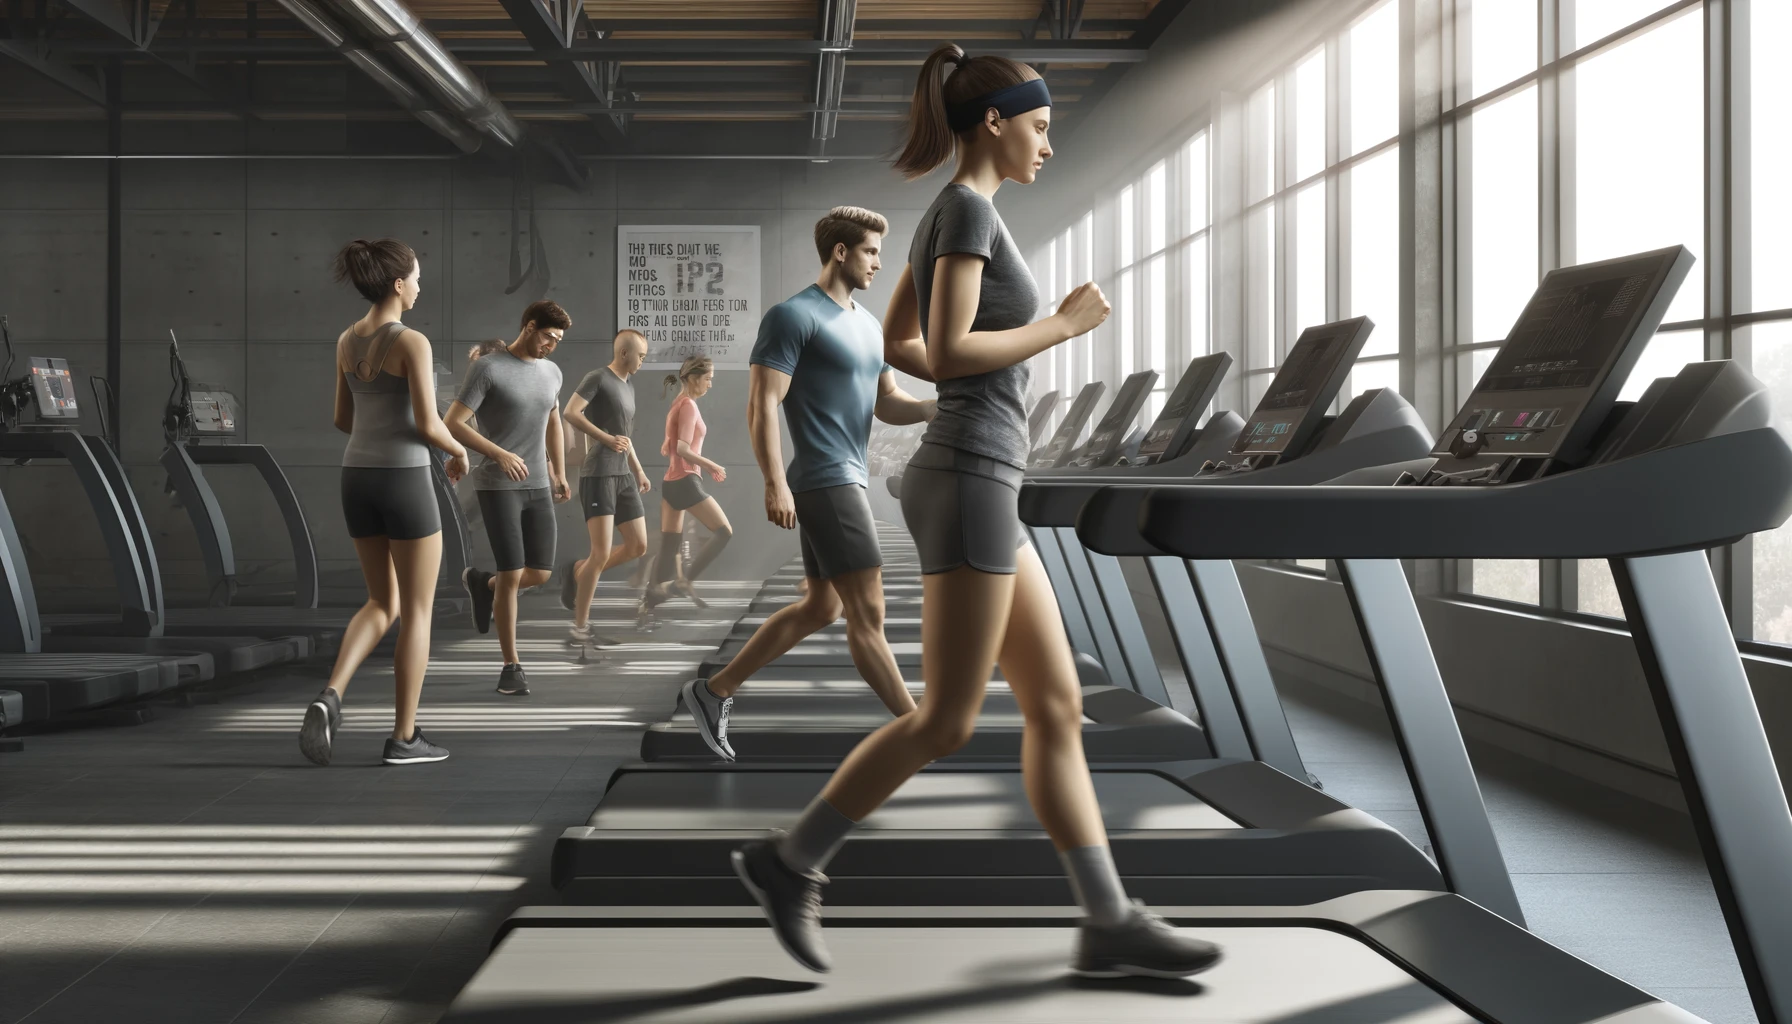 Inside a modern gym featuring a treadmill area with individuals of diverse backgrounds